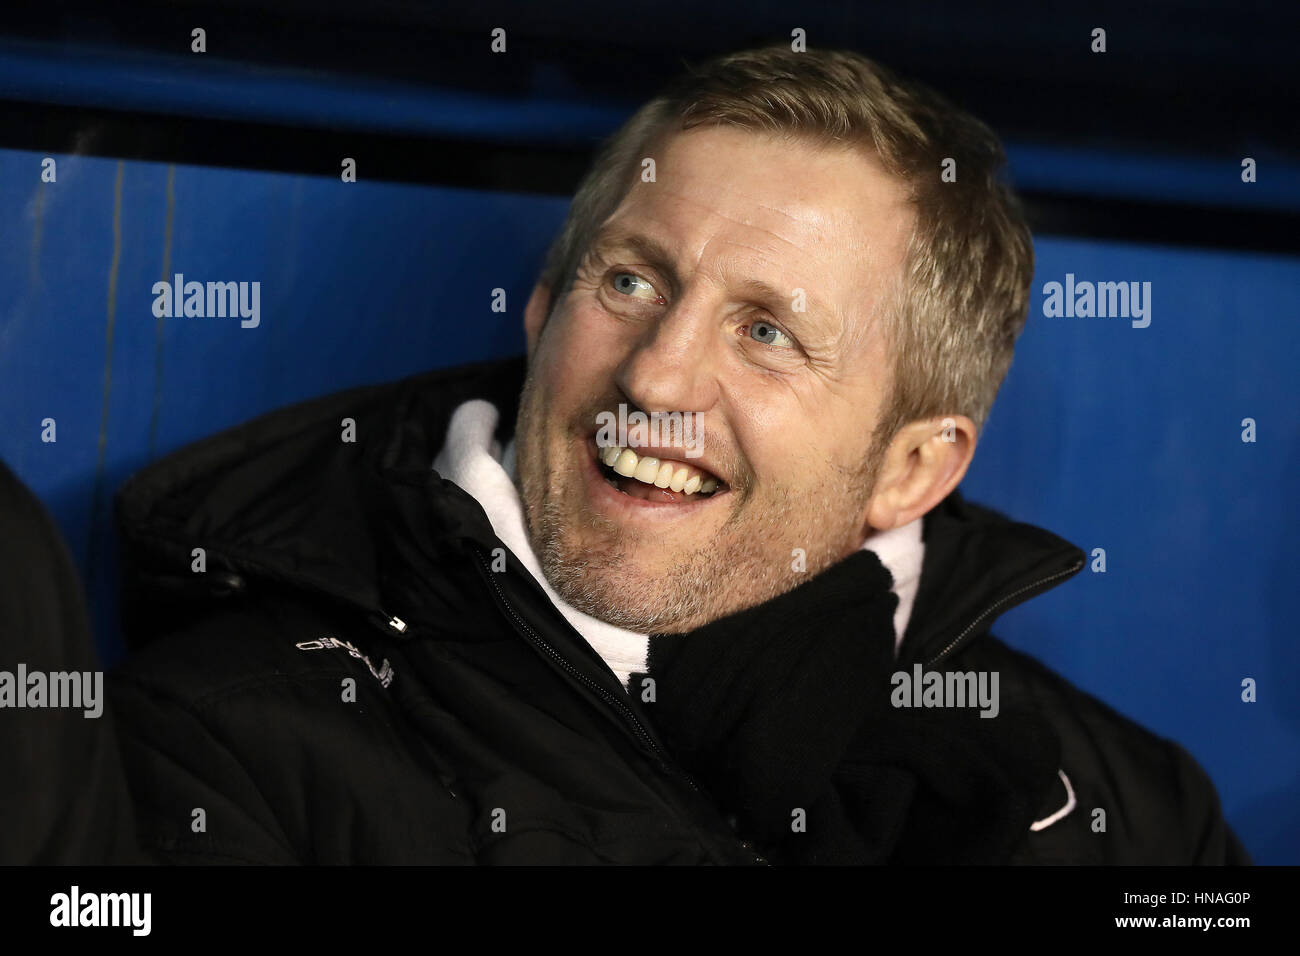 Widnes Vikings' Head Coach Dennis Betts before the game against Huddersfield Giants, during the Super League match at the Select Security Stadium, Widnes. Stock Photo